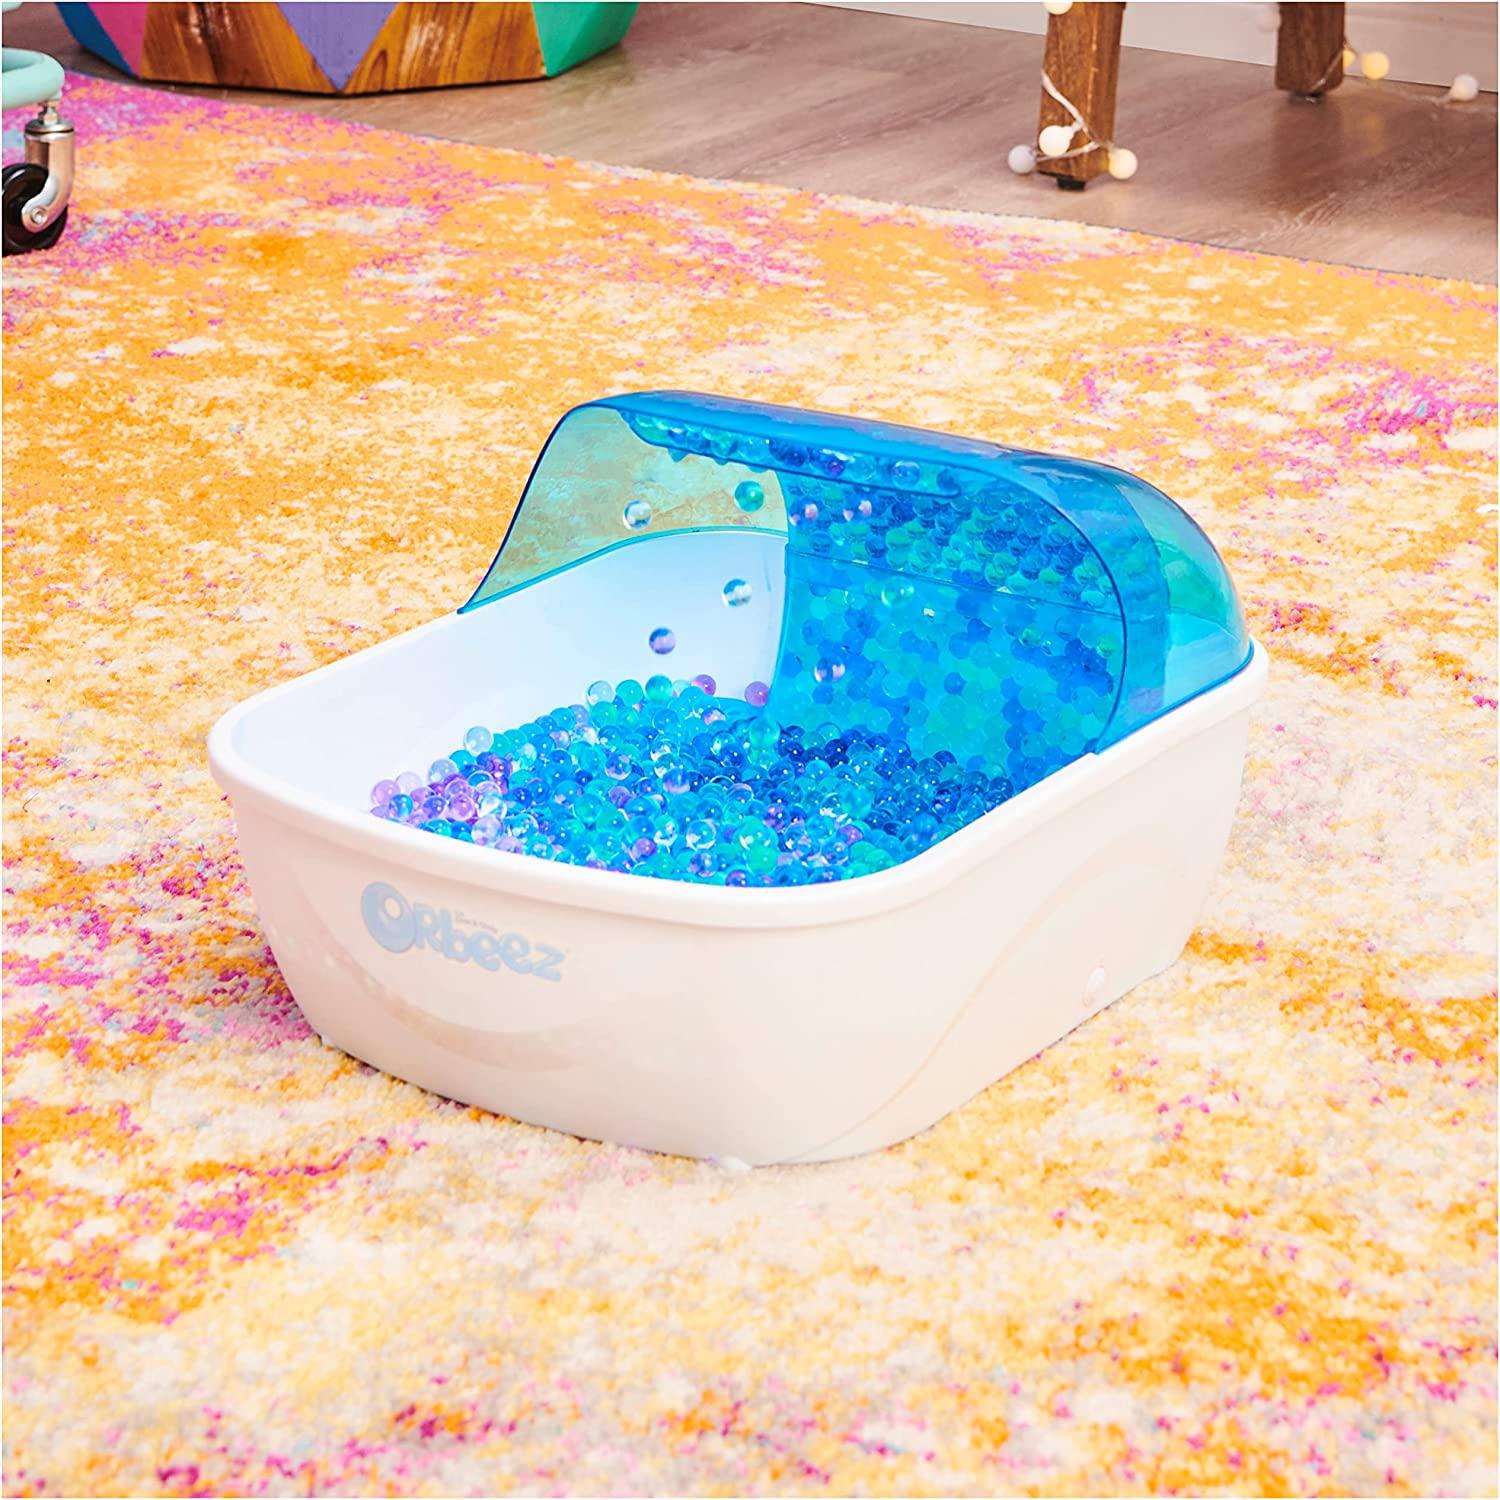 Orbeez Vibrating Massage Spa with 2,200 Water Beads Guinea